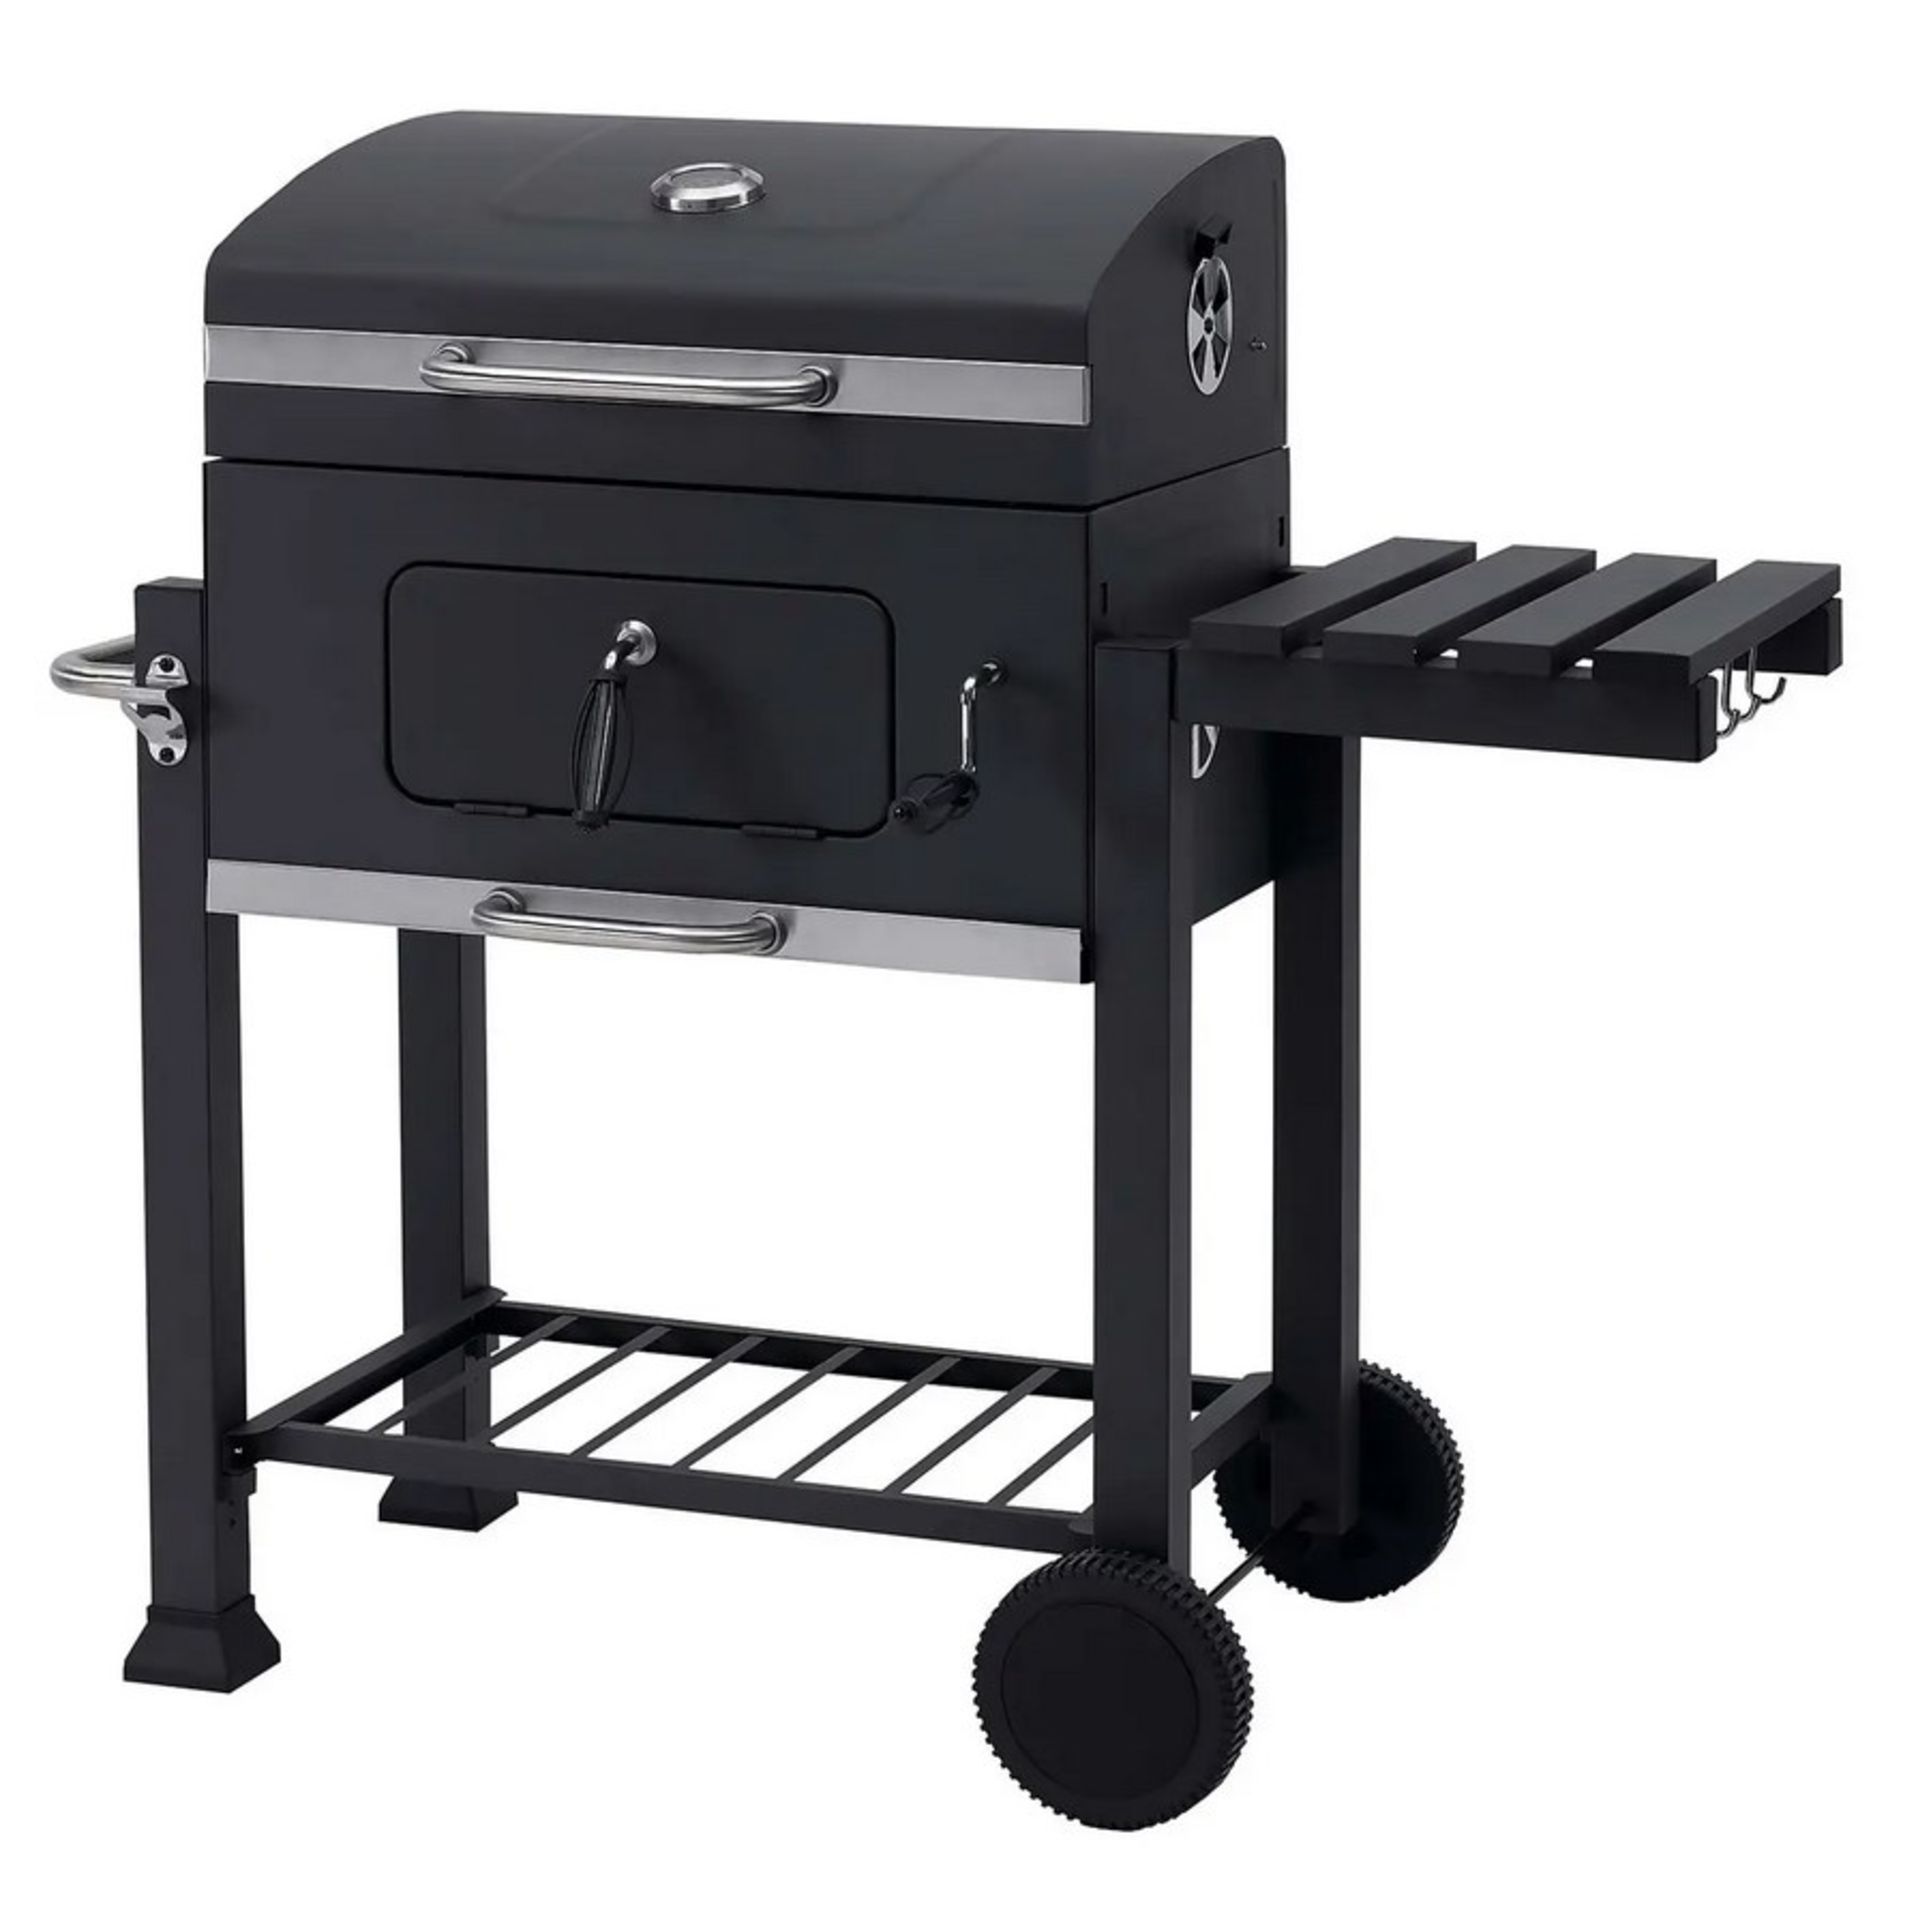 (56/Mez/P4) RRP £180. Texas Franklin Charcoal BBQ. Grid In Grid System For Easy Removal Of Centra... - Image 2 of 7